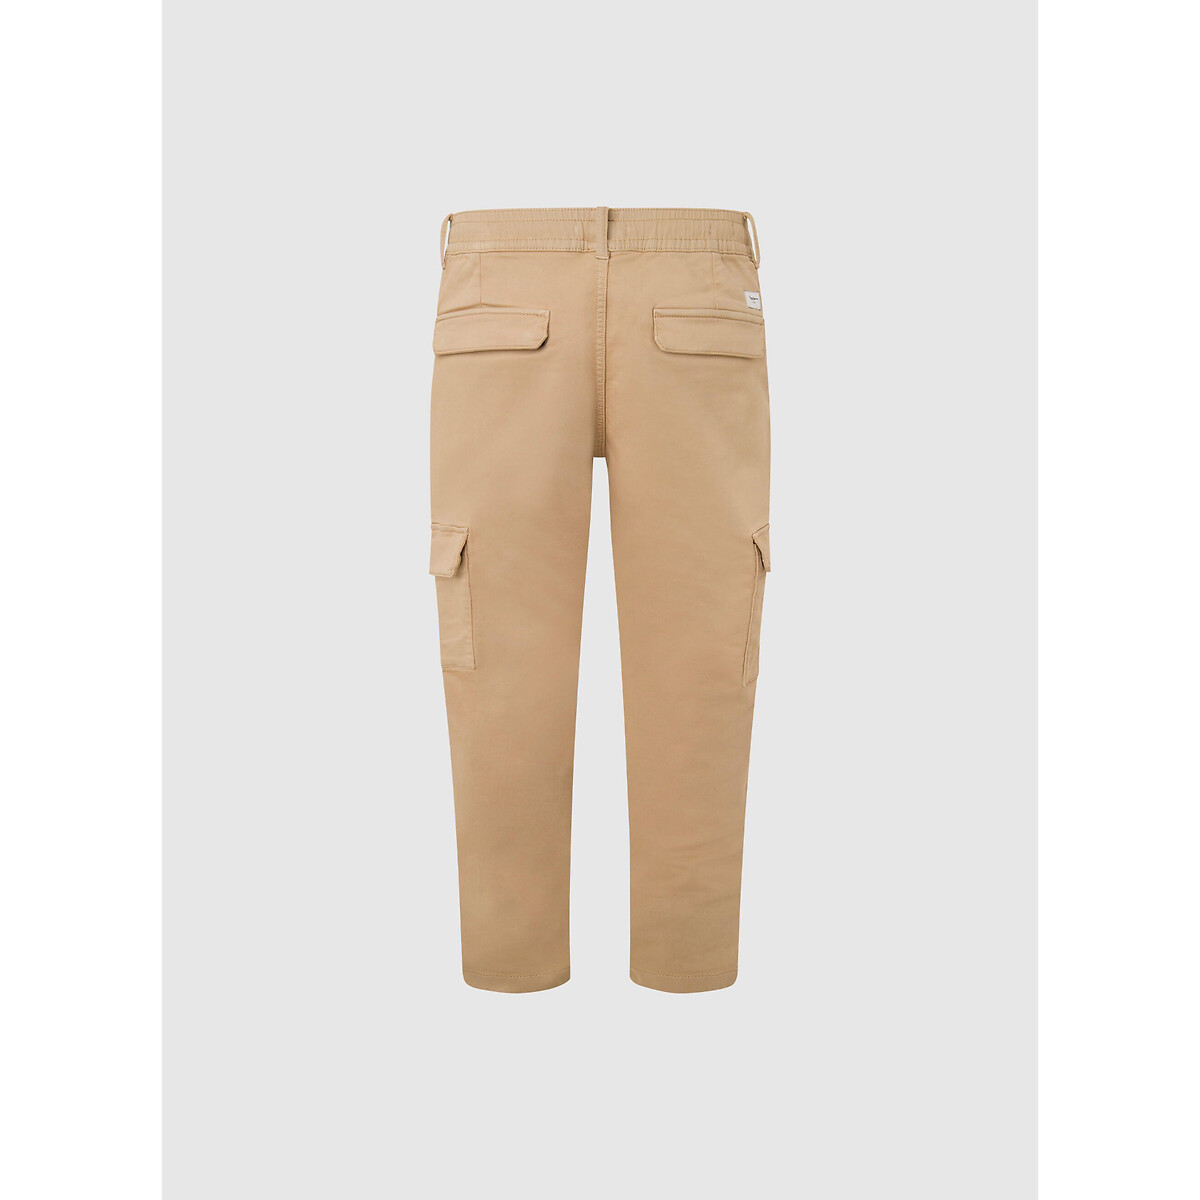 Buy Pepe Jeans Men Slim Fit Cargo Trousers - Trousers for Men 25690294 |  Myntra